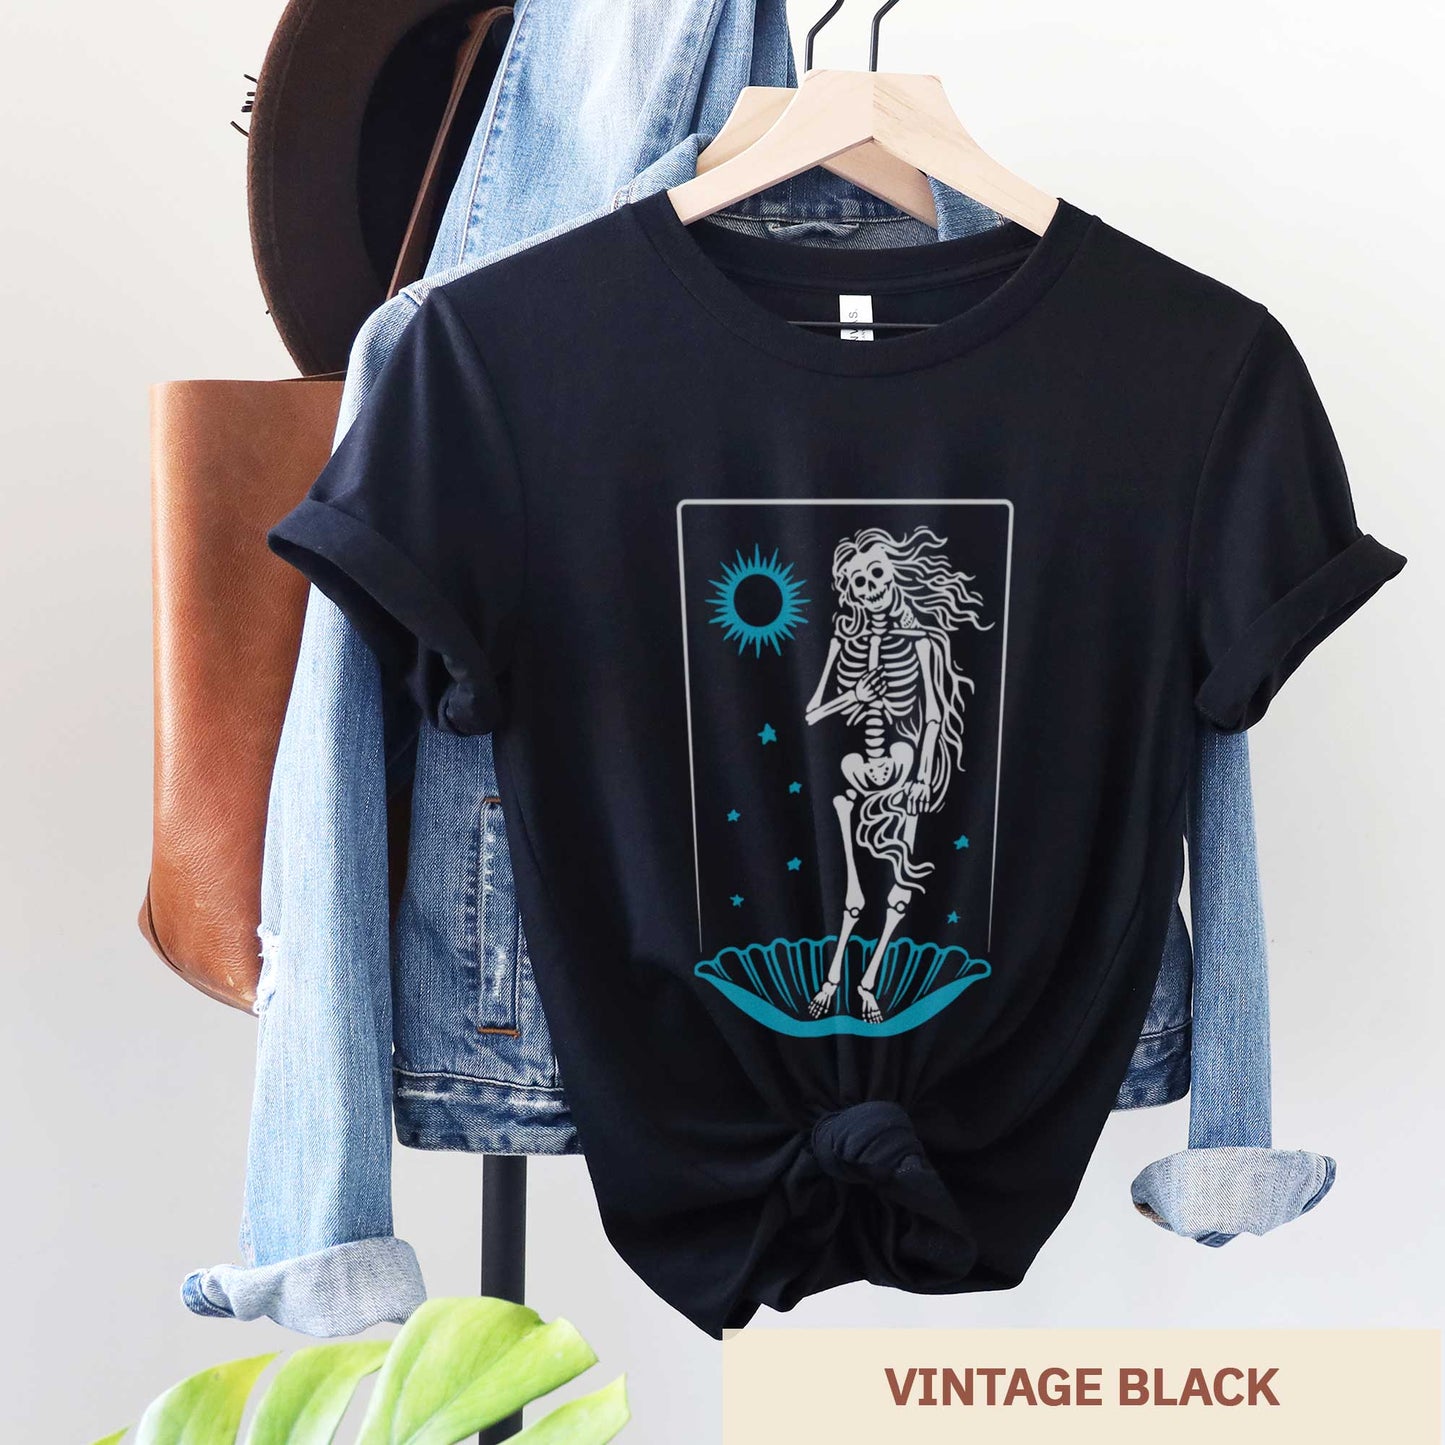 A hanging vintage black Bella Canvas t-shirt that features a skeleton in a pose similar to Botticelli's Birth of Venus painting.